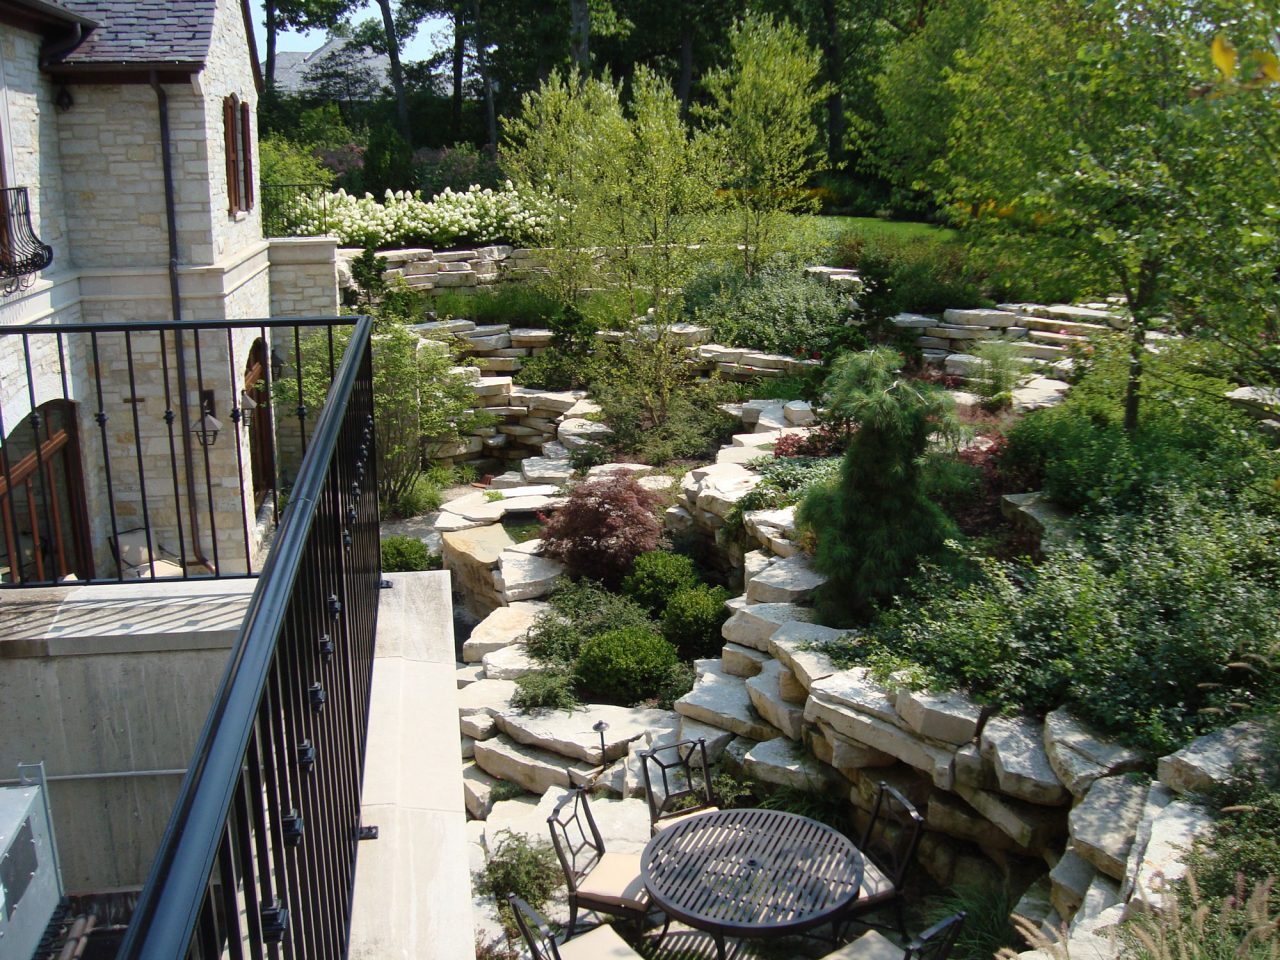 Sunken garden with ledgerock outcroppings and water features